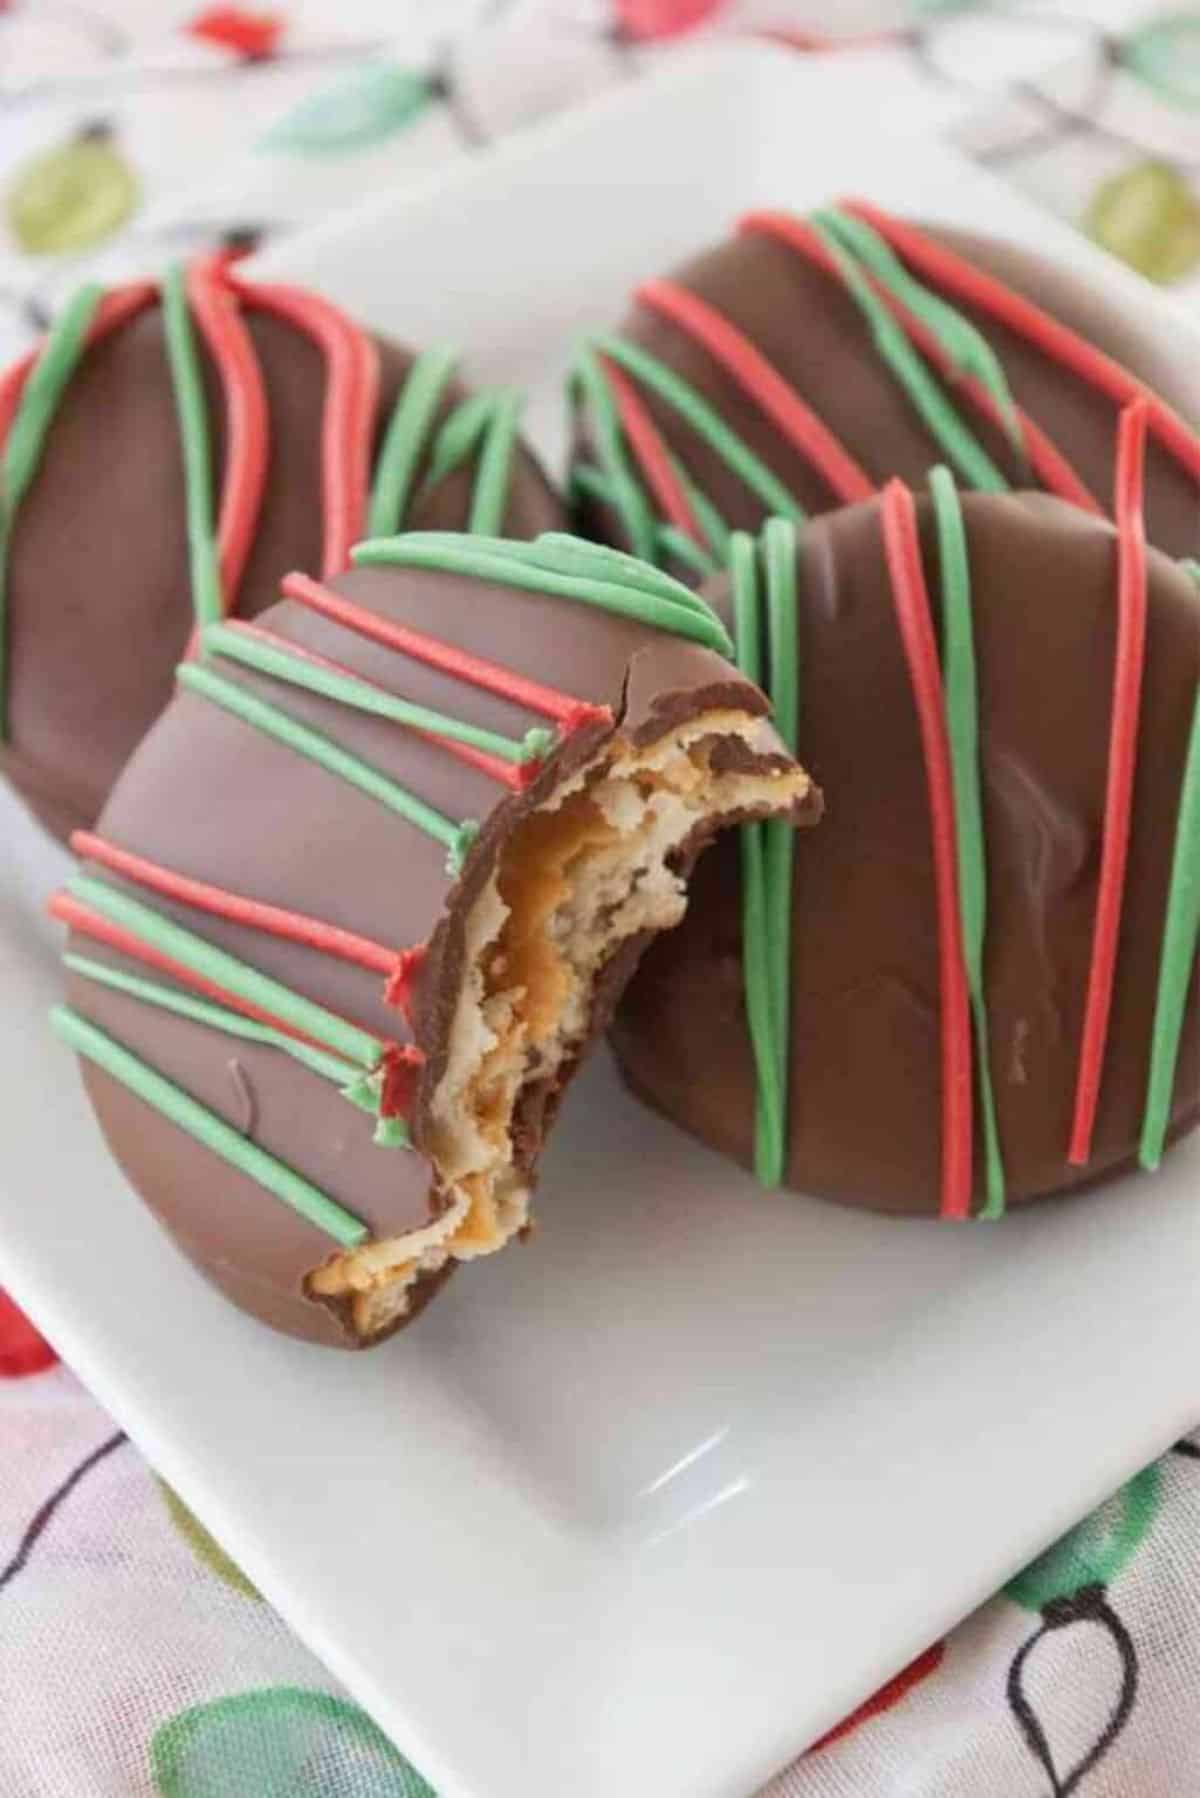 Chocolate Dipped Peanut Butter Ritz cookies on a white plate.